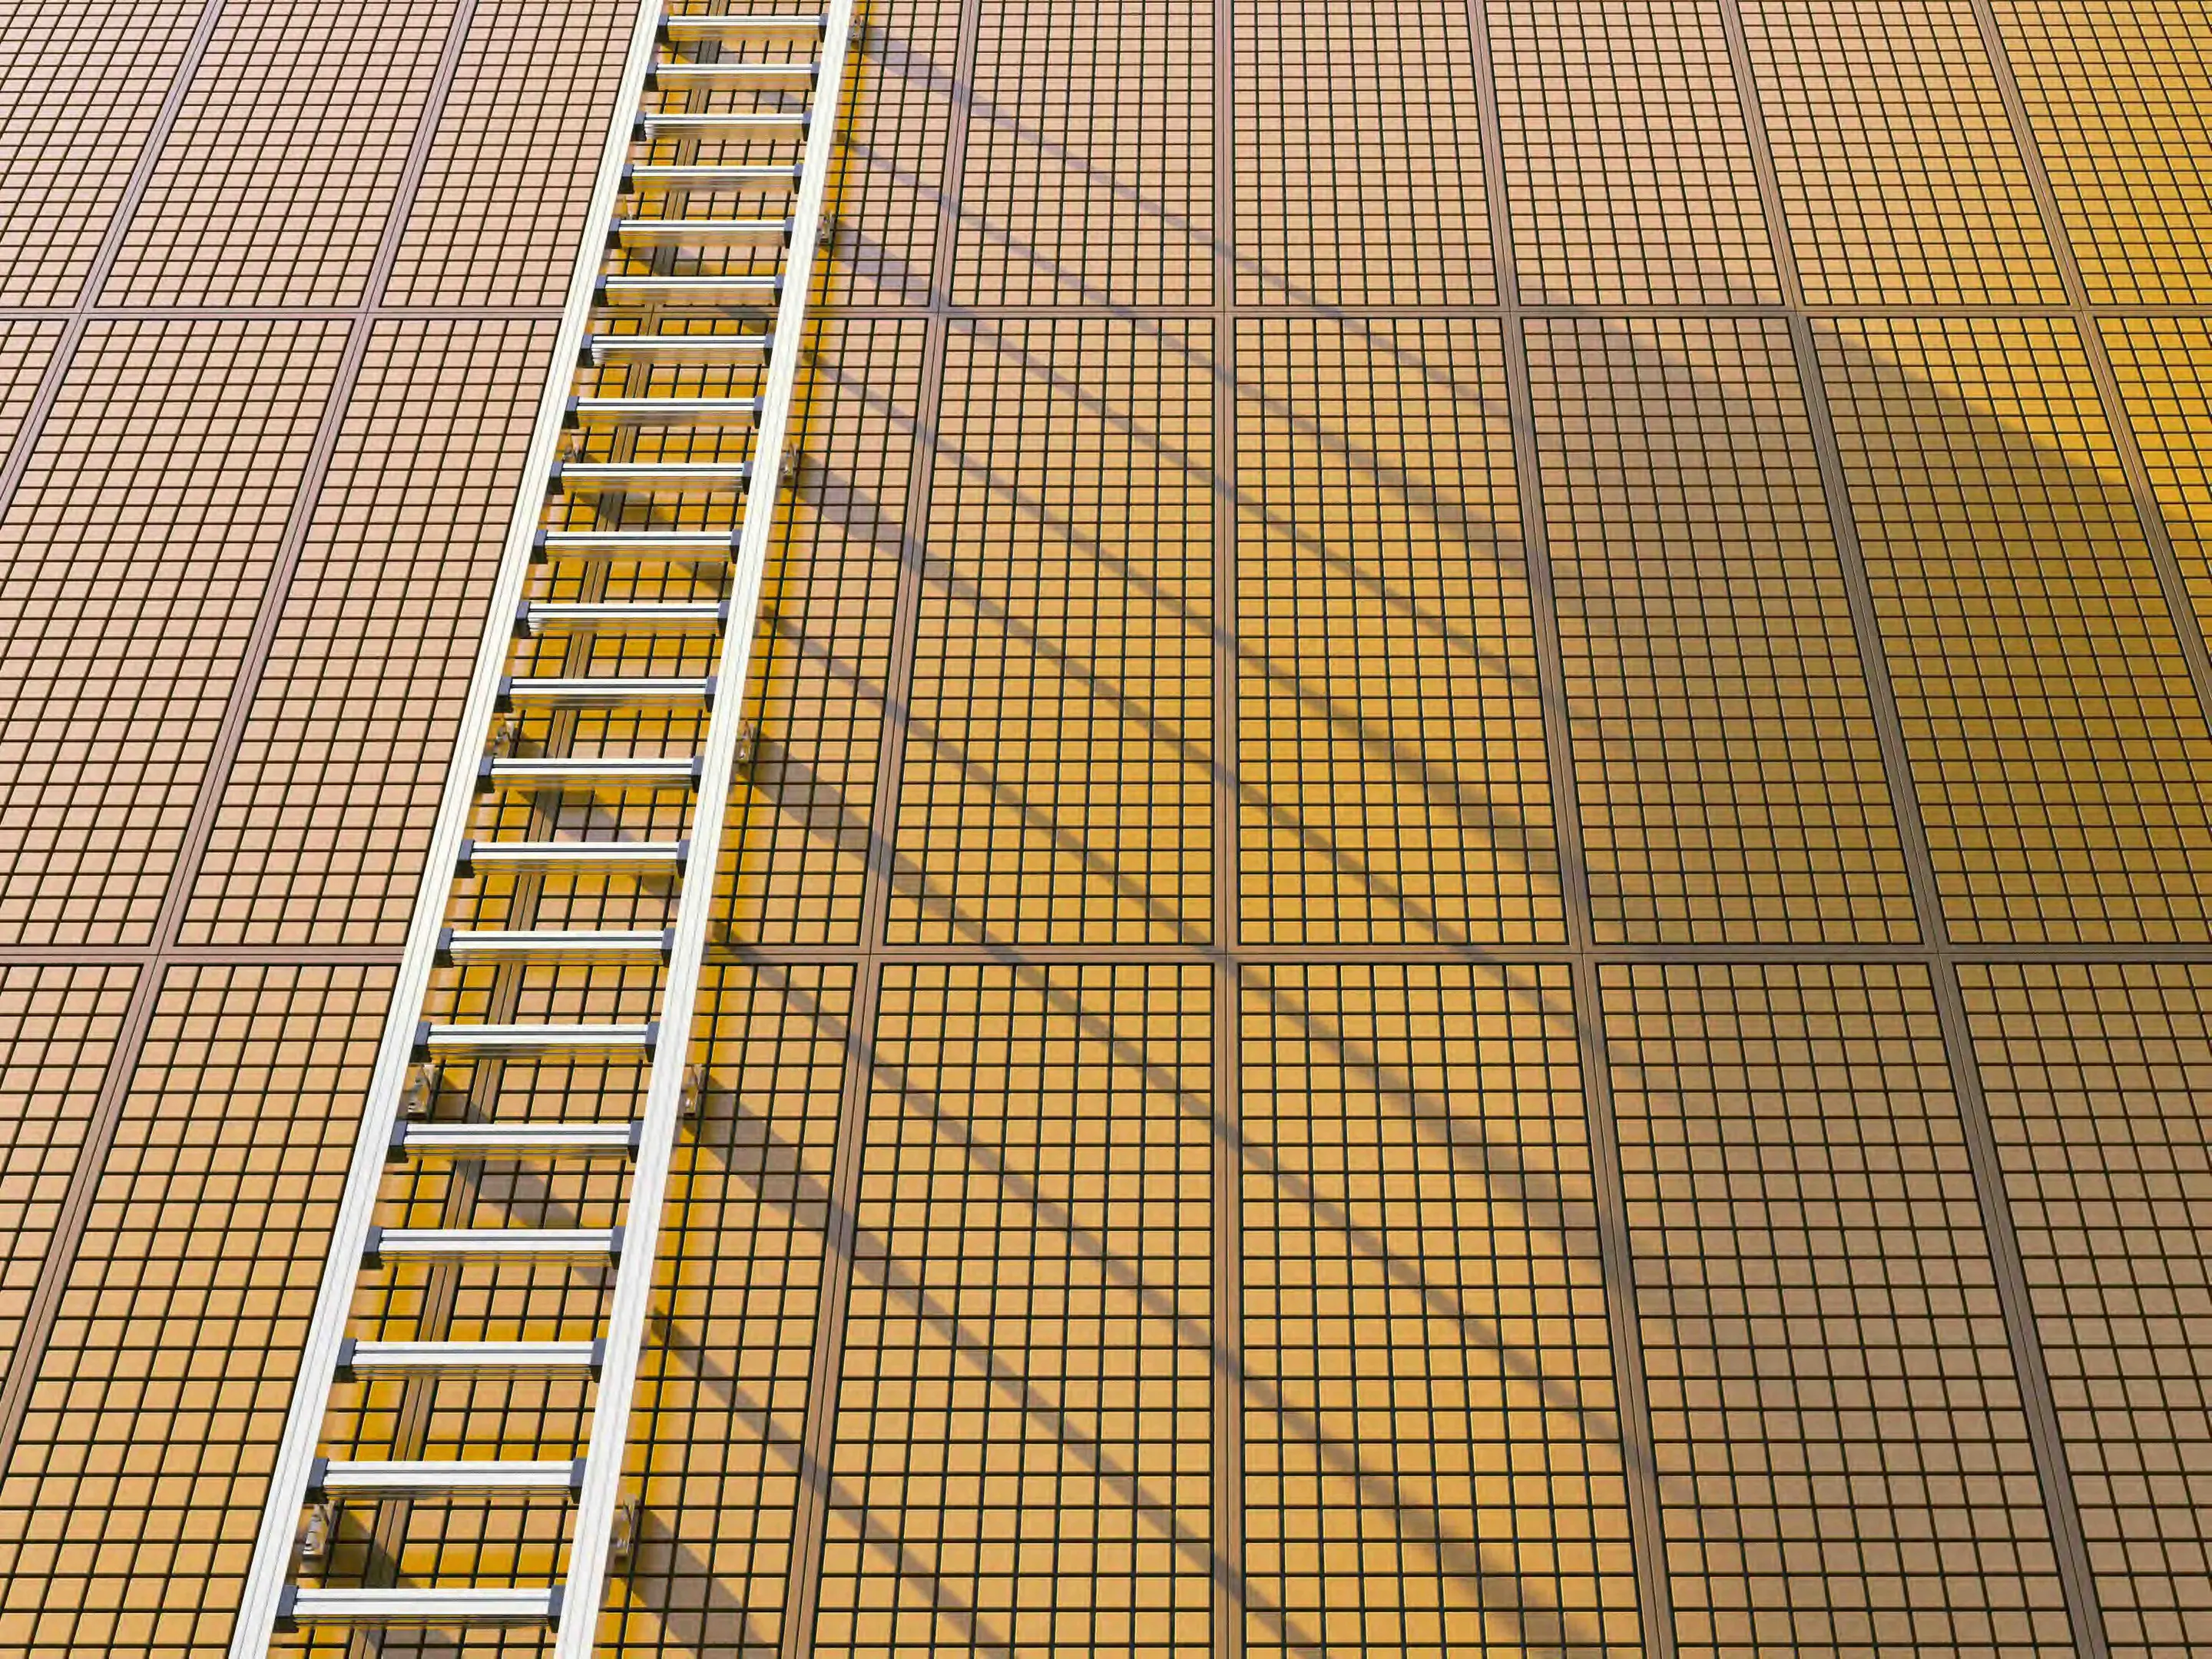 A ladder set against a background of yellow tiles